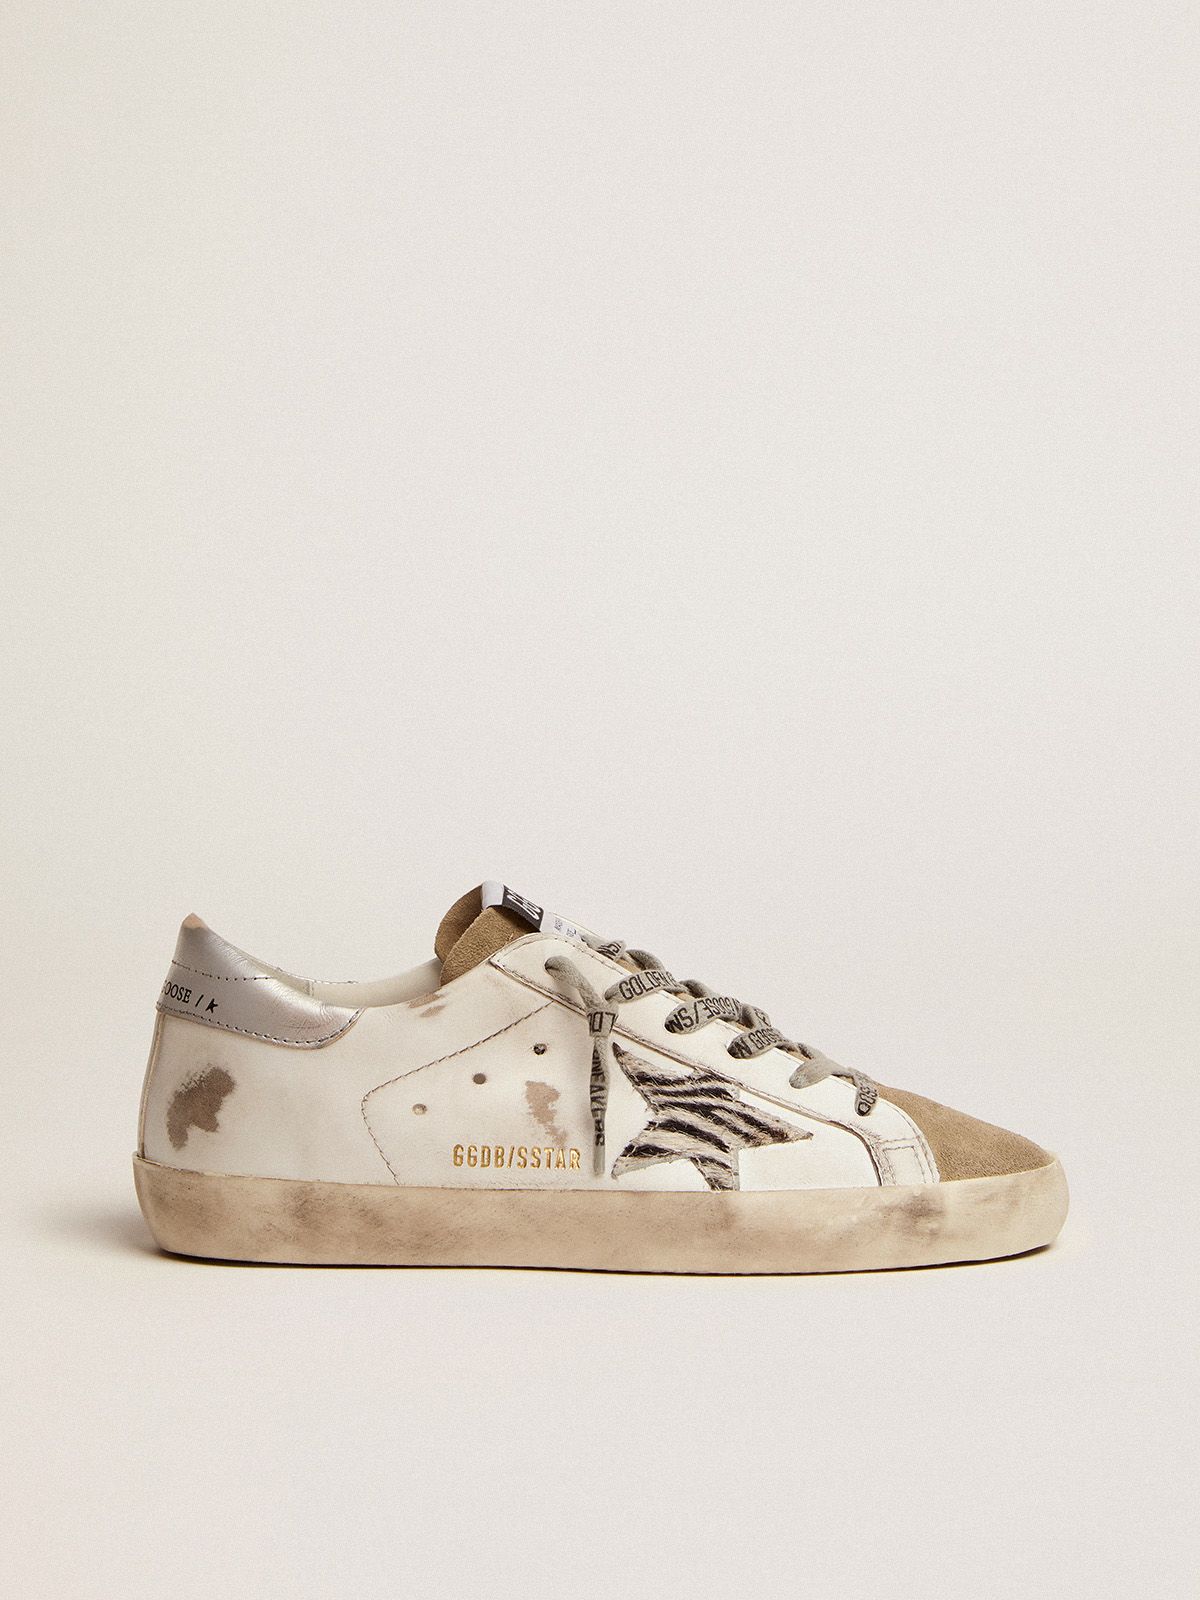 golden goose zebra-print skin tab sneakers star silver pony and Super-Star heel with laminated leather